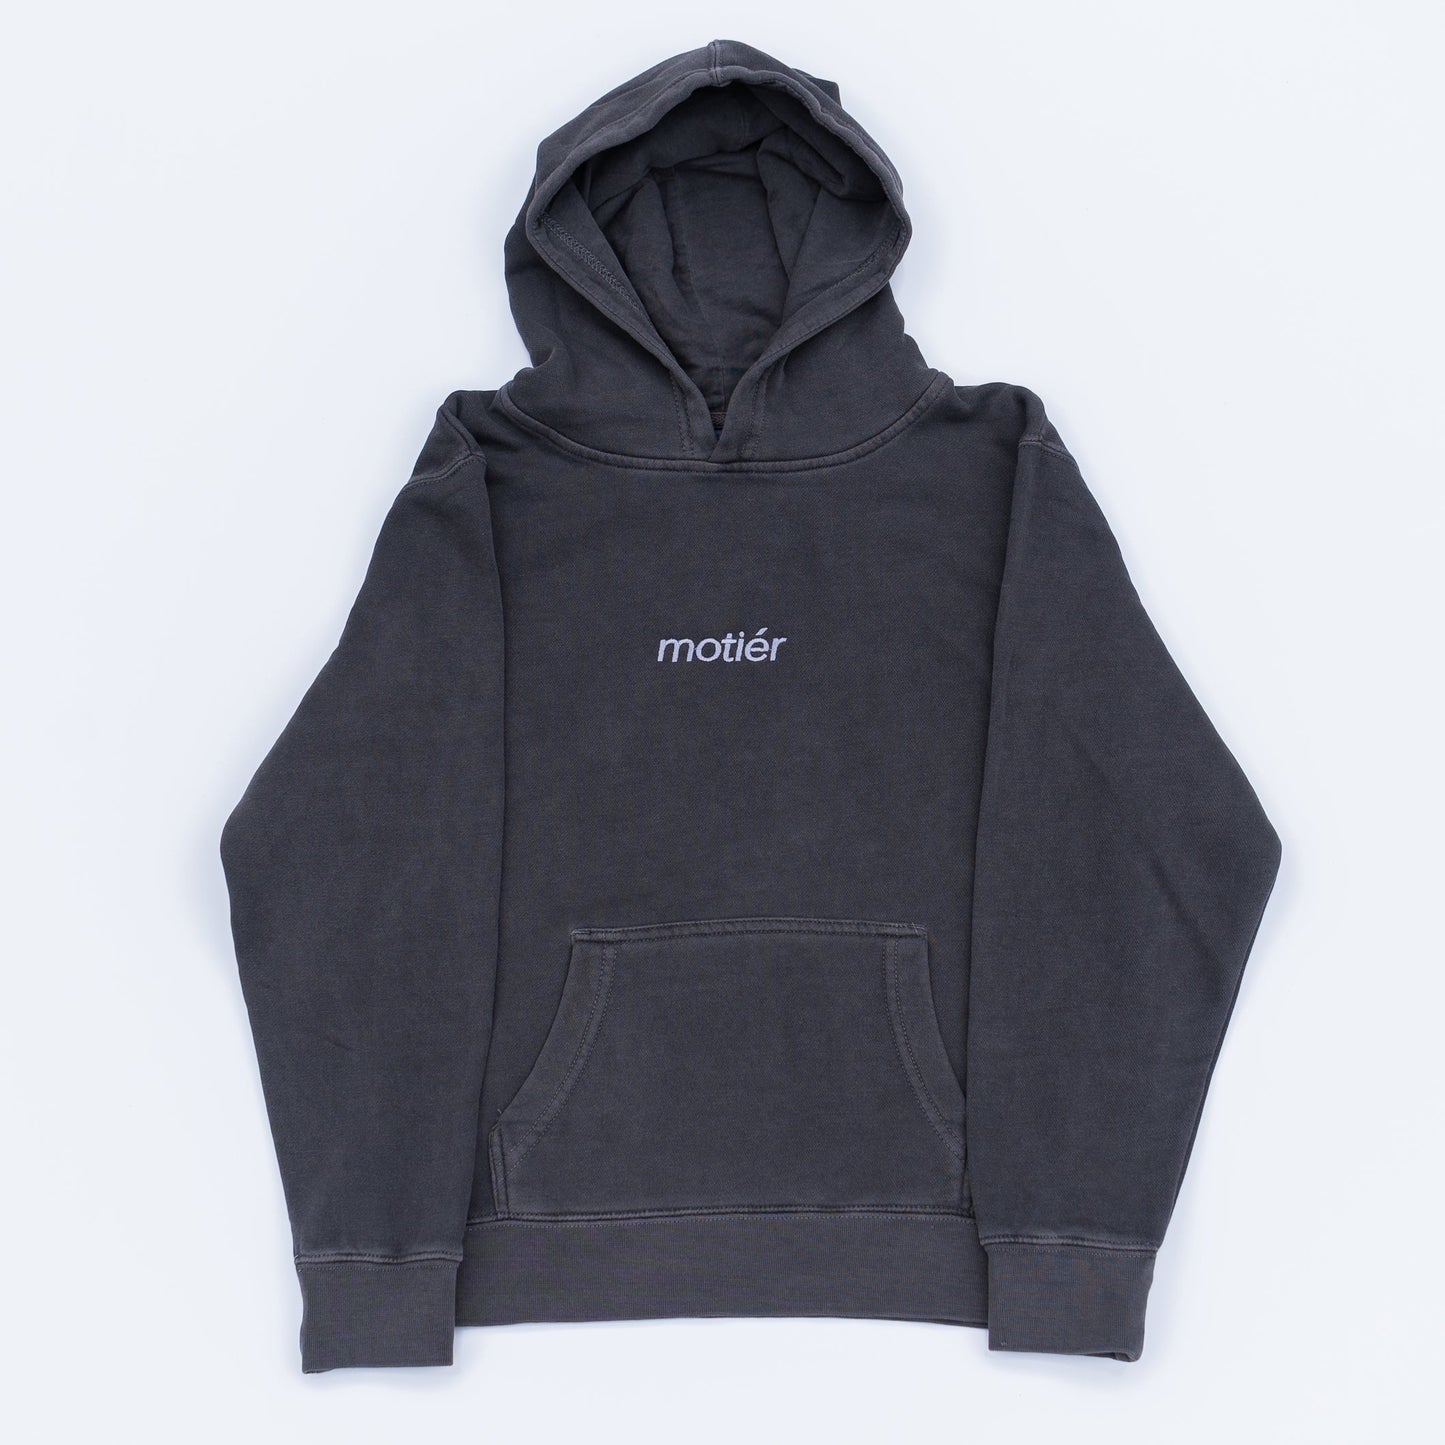 The Motier Youth Classic Embroidery Hoodie (Charcoal)